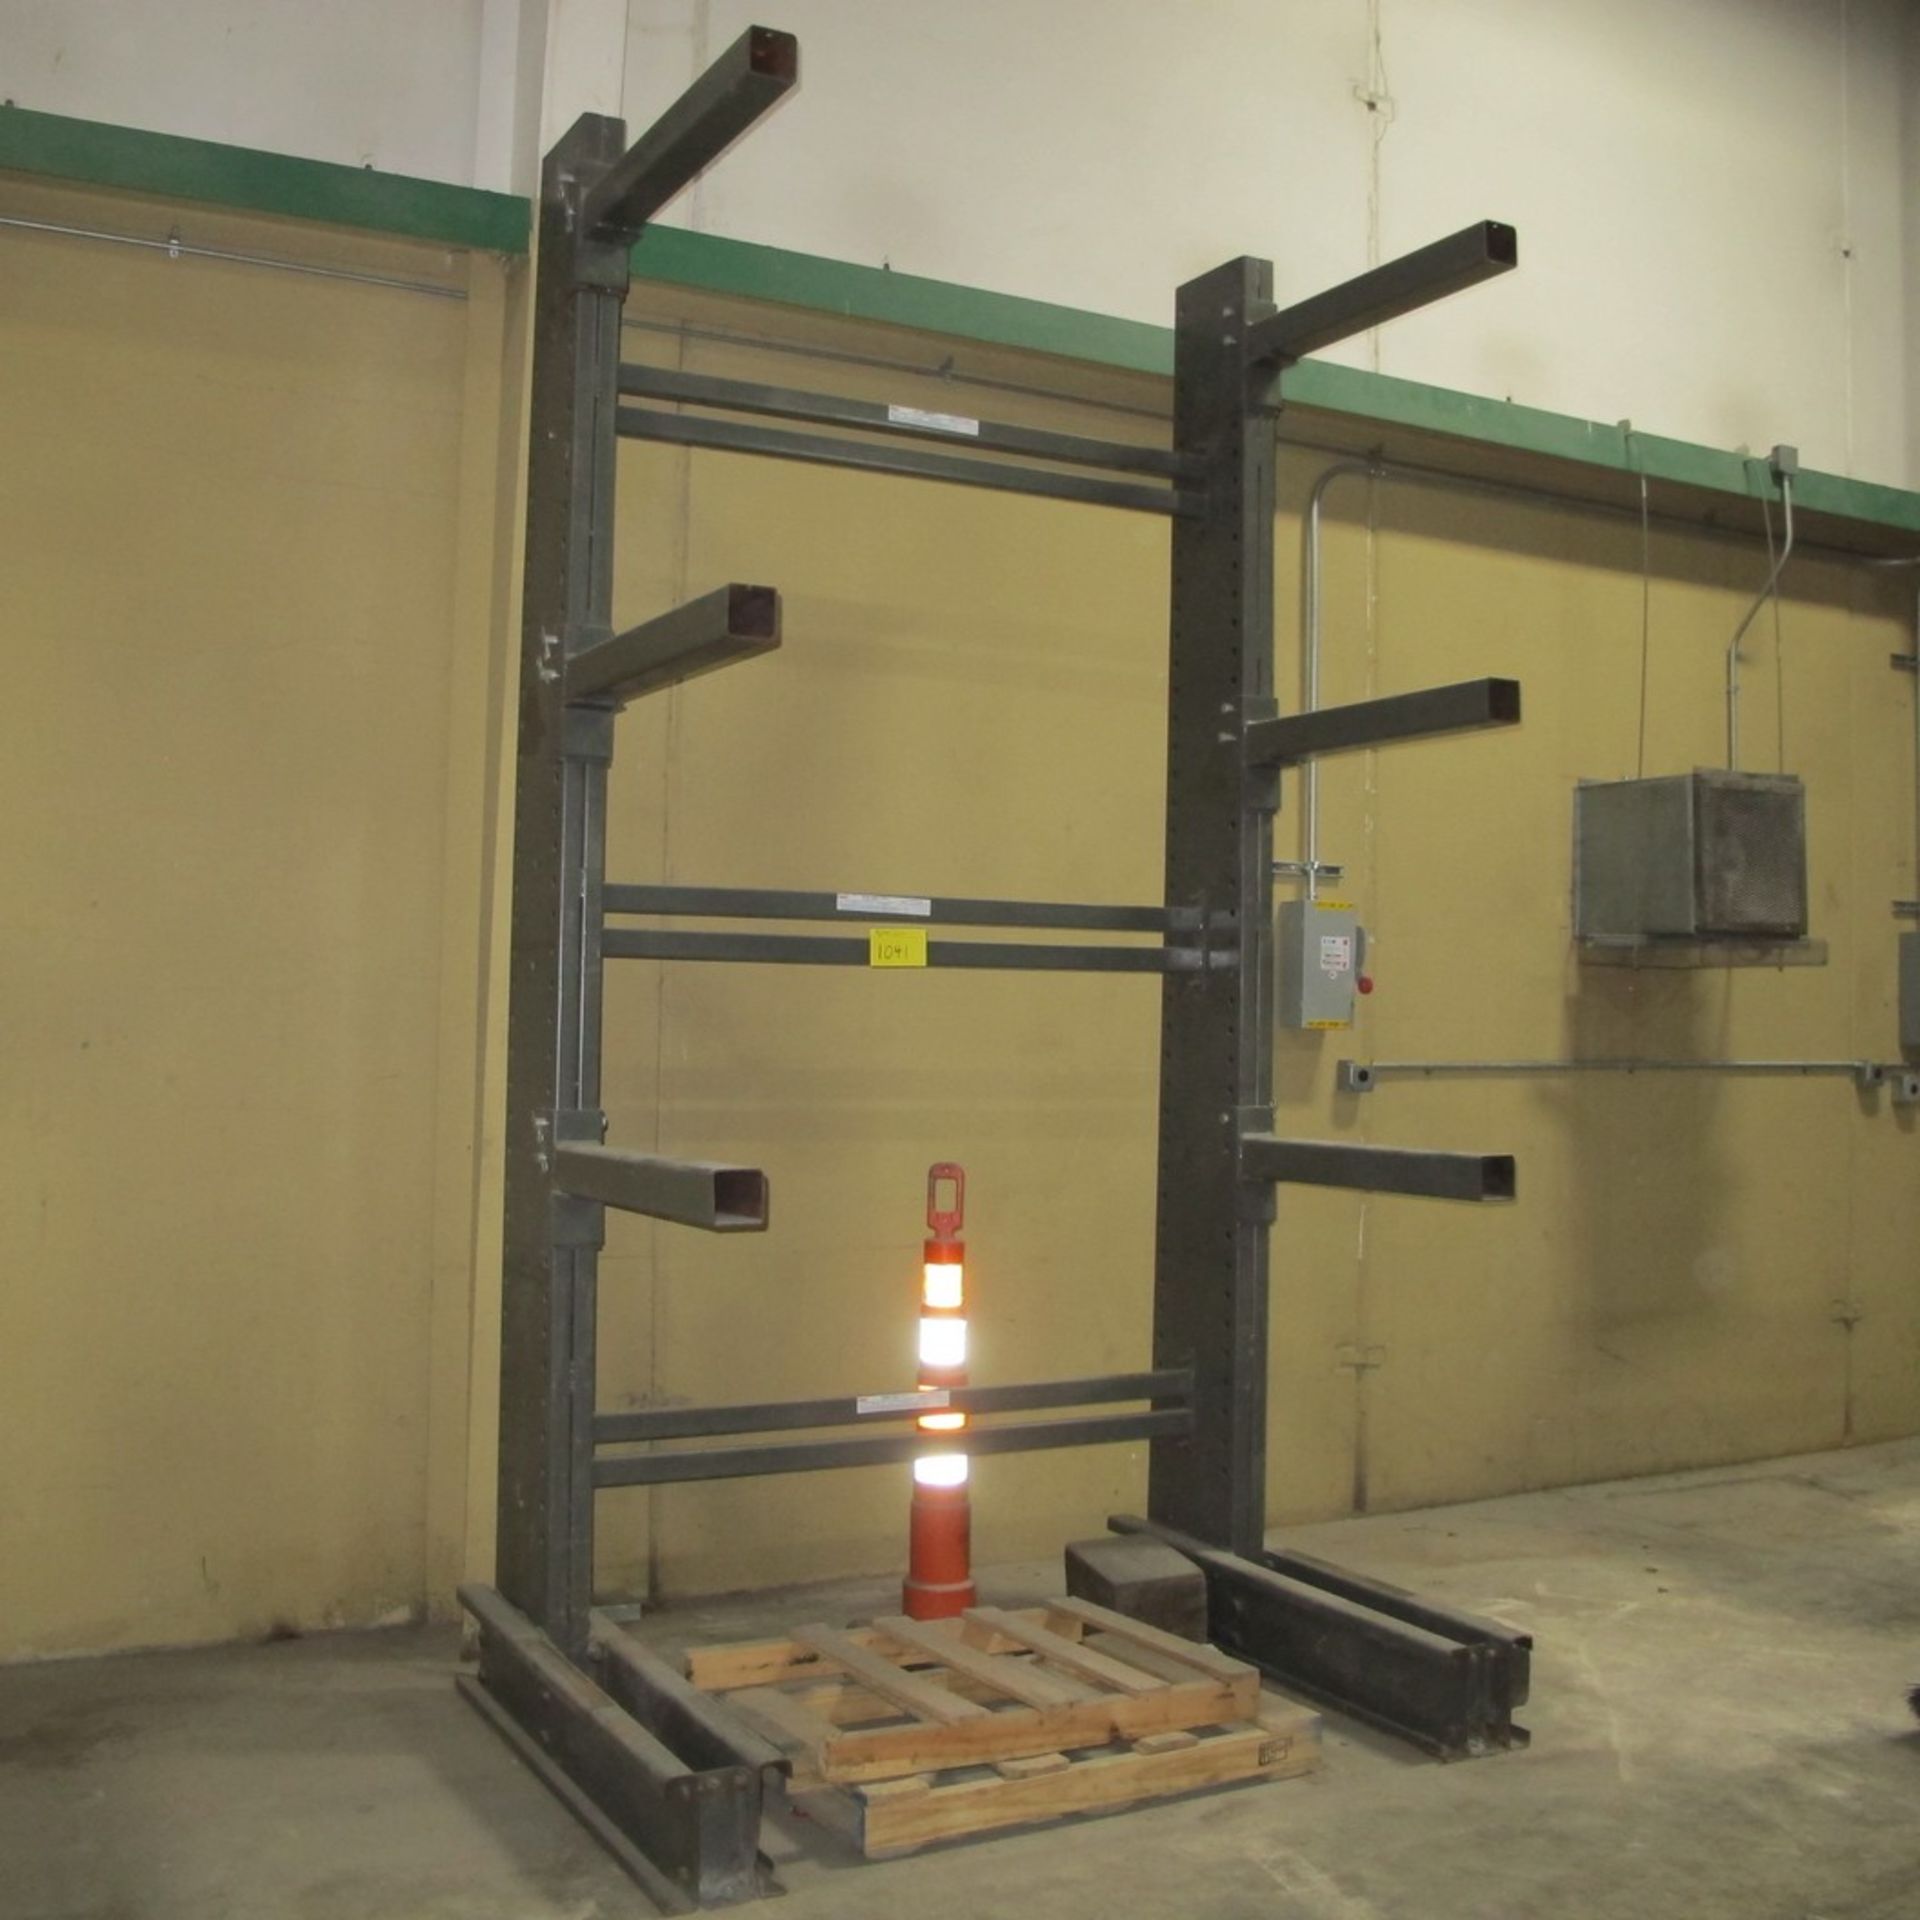 JARIKE STEEL TRIES SERIES 60 4-LEVEL CANTILEVER RACK APPROX. 78"W X 55"D AT BASE, 36" ARMS X 10'H (